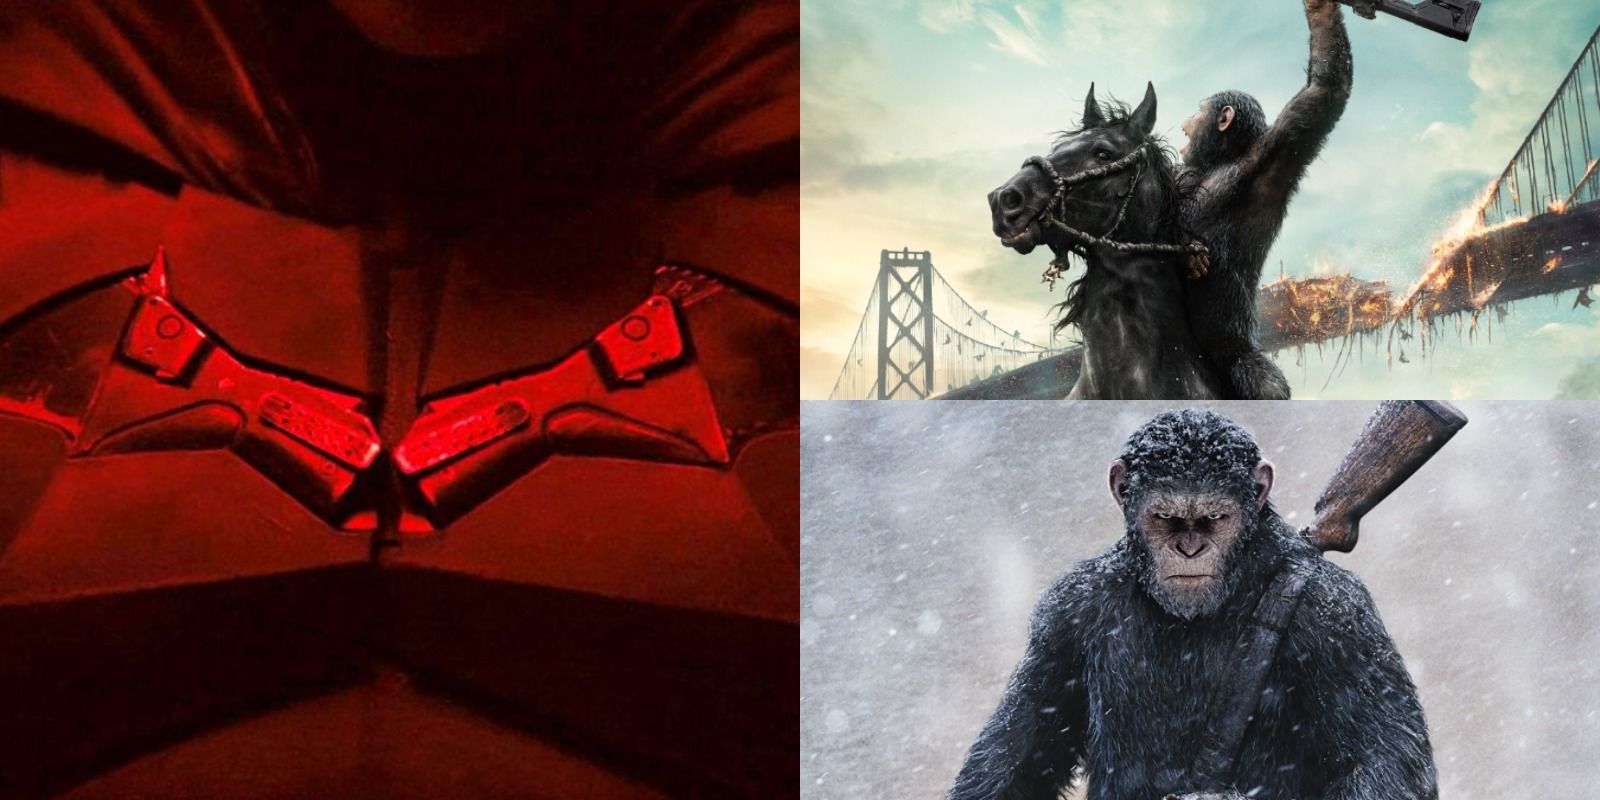 Early teaser for Pattinson's Batsuit and Reeves' Apes movies